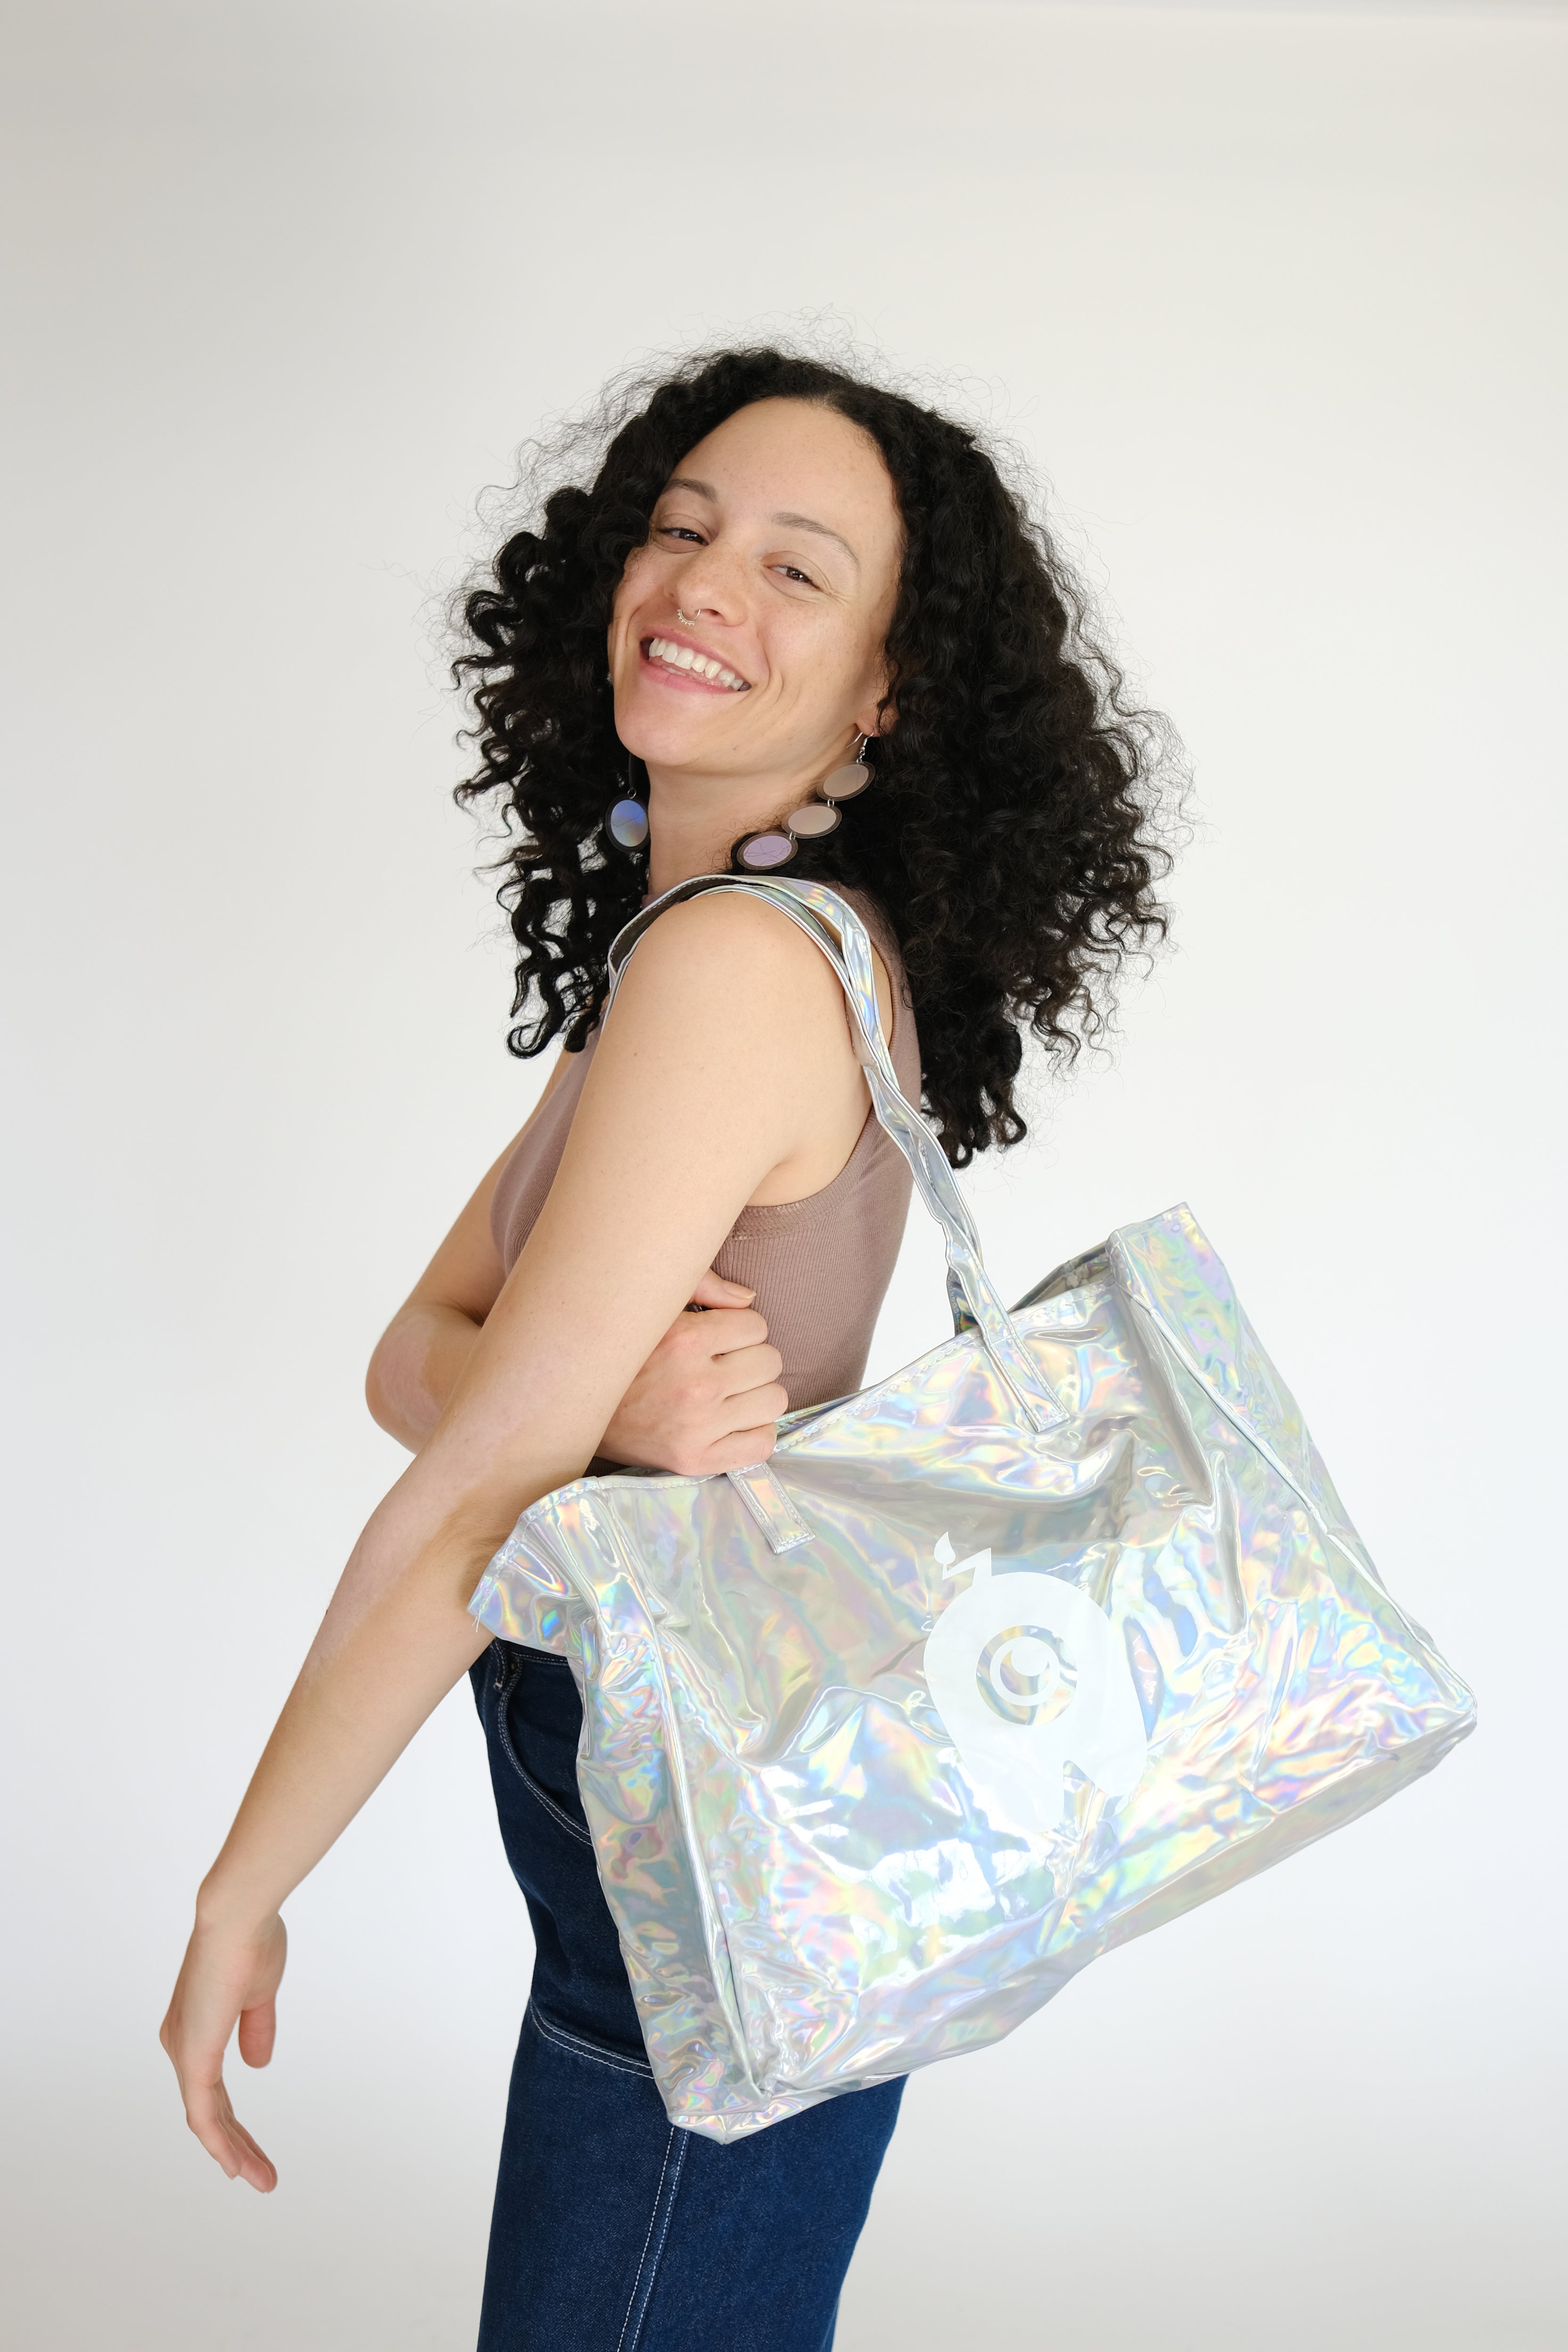 Holographic Shopping Tote